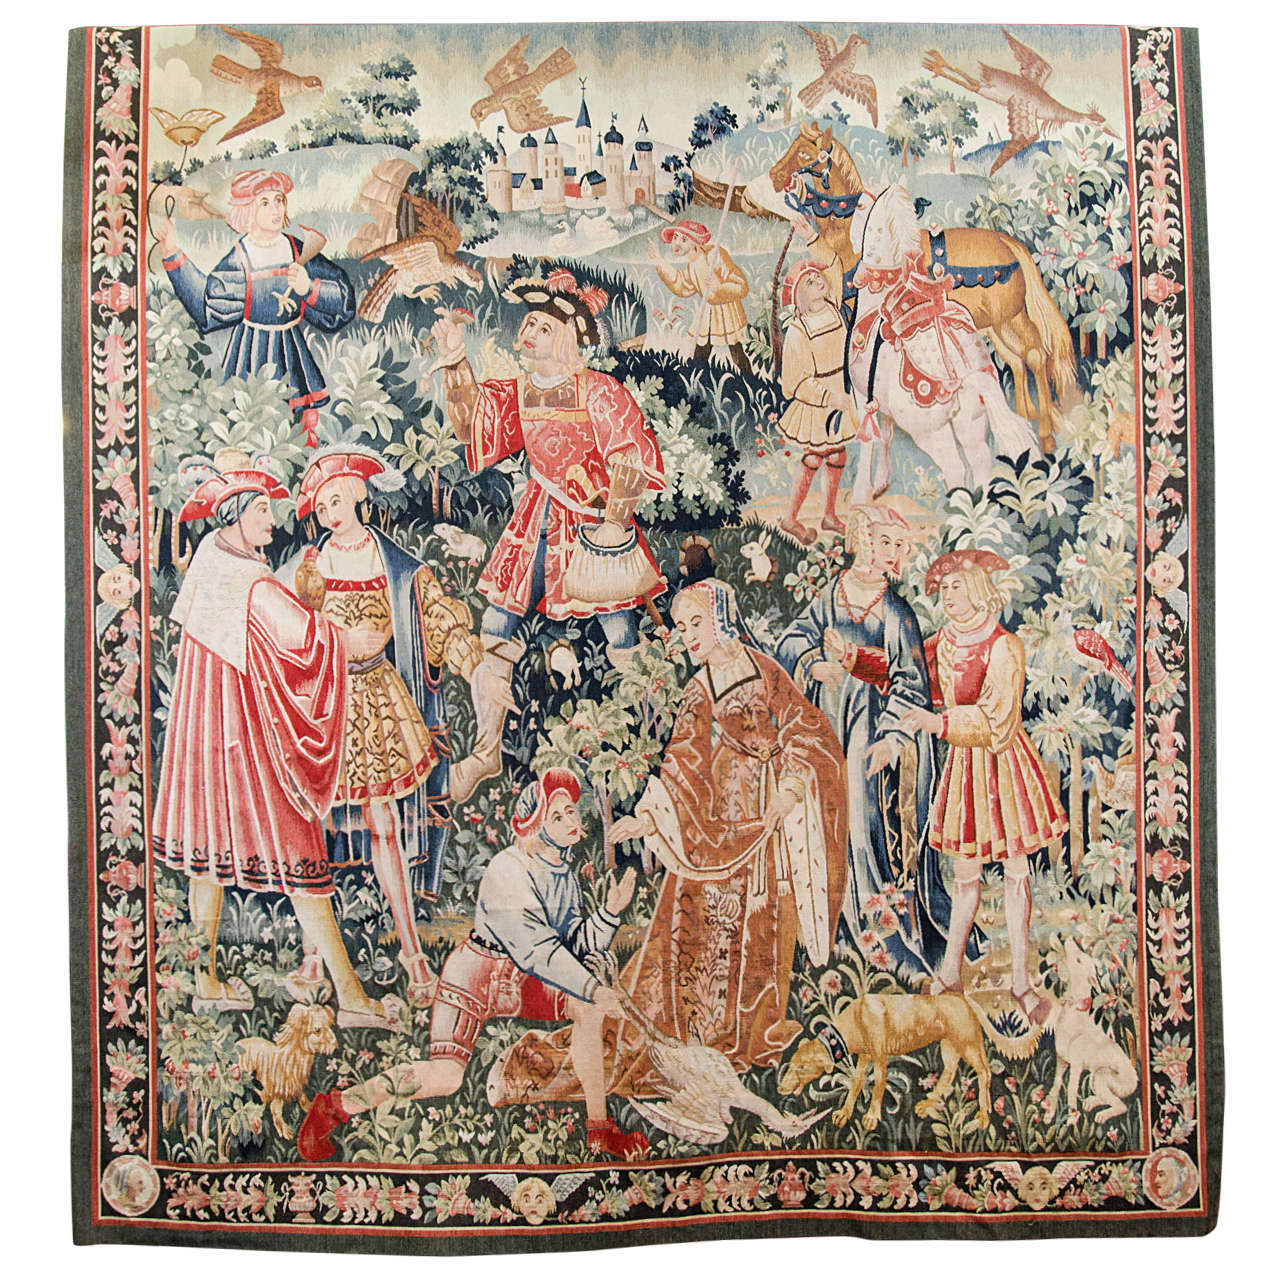 A large, colorful tapestry depicting animals, flowers and figures in medieval attire.

Reduced from: $6,800